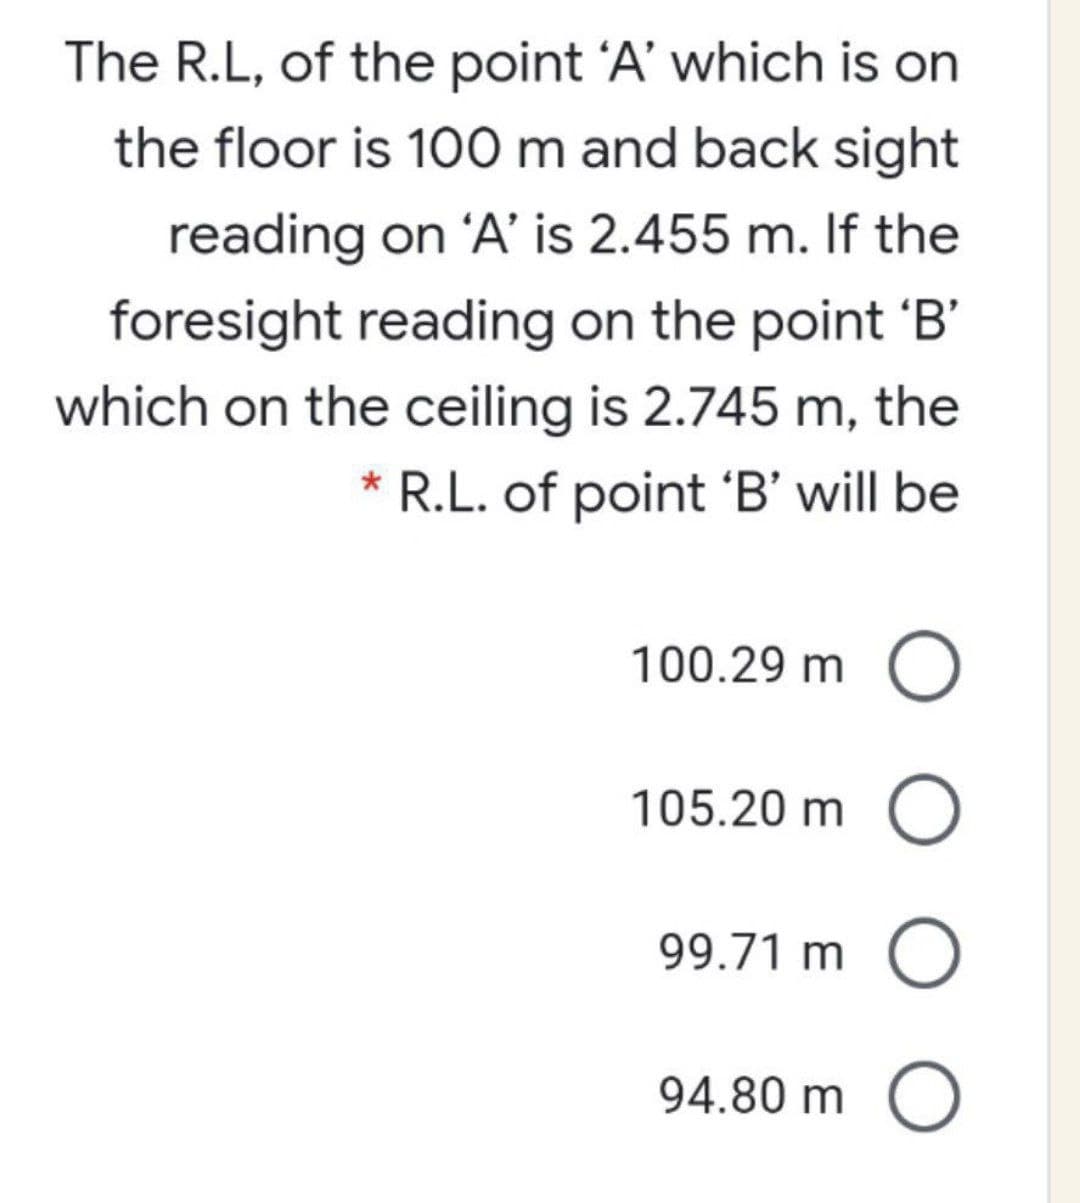 The R.L, of the point 'A' which is on
the floor is 100 m and back sight
reading on 'A' is 2.455 m. If the
foresight reading on the point 'B'
which on the ceiling is 2.745 m, the
* R.L. of point 'B' will be
100.29 m
105.20 m O
99.71 m O
94.80 m O
